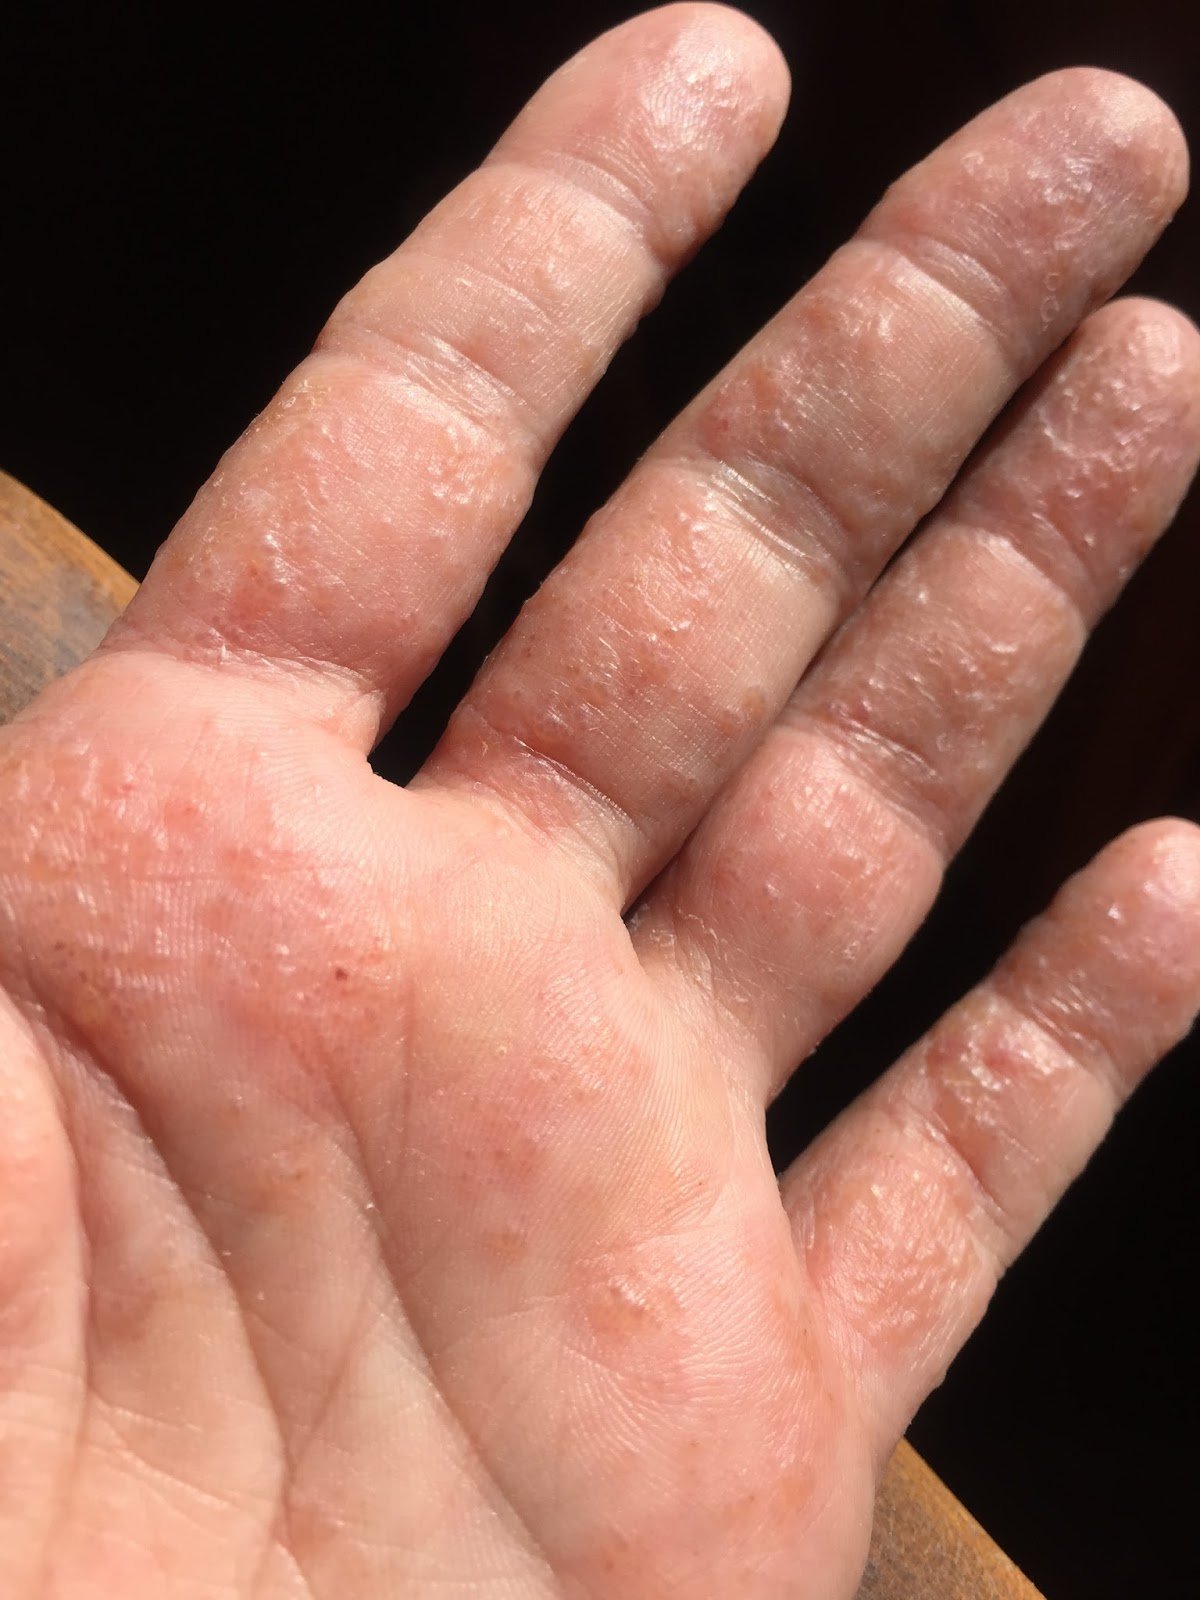 Bubbles and Blisters: What is it?!?